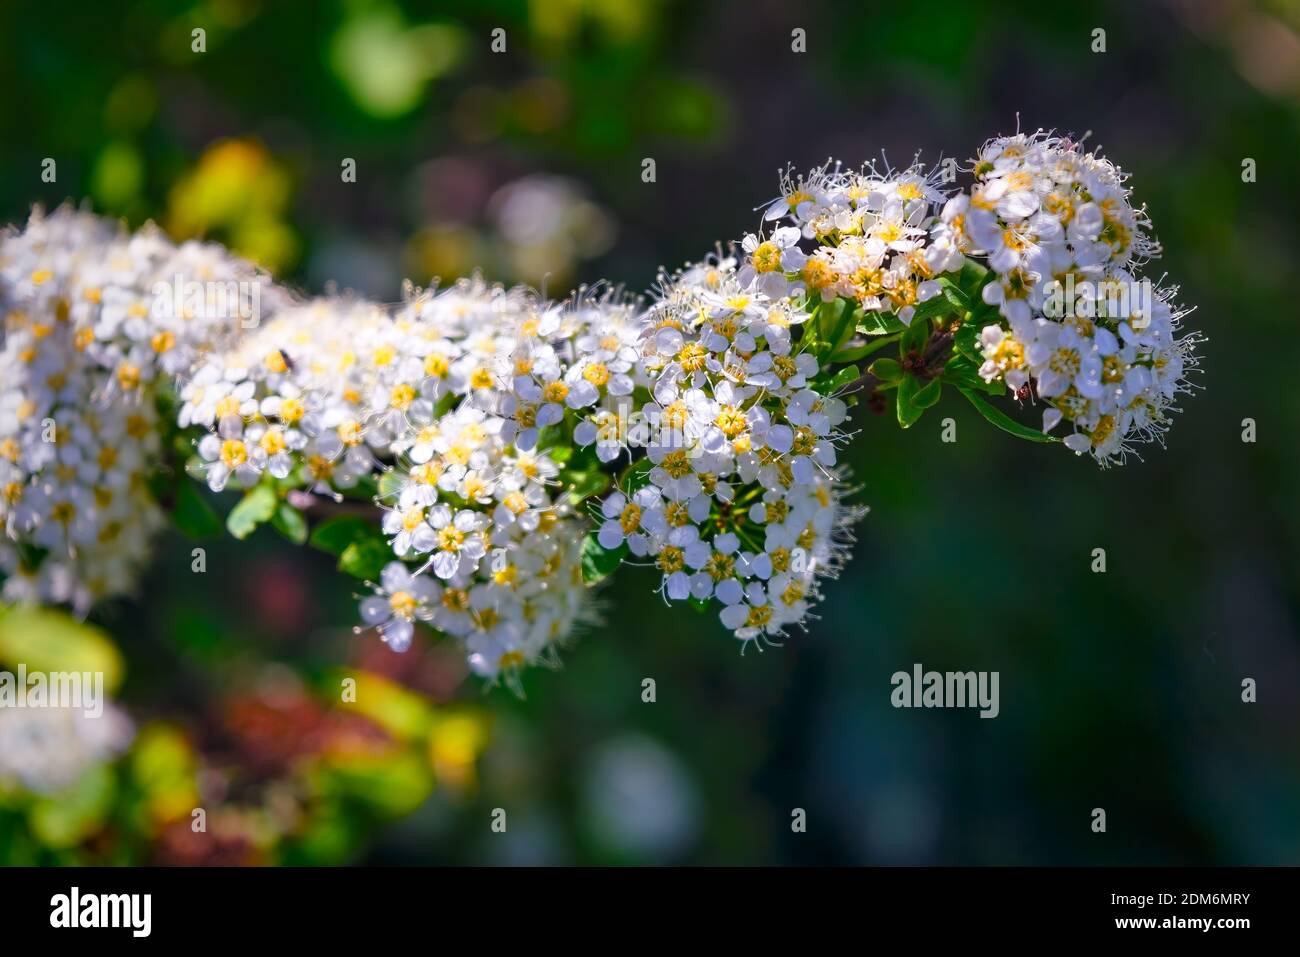 Spring blooming shrub with many white flowers Spirea.Spiraea cantoniensis. Also known as Reeve's spiraea, Bridalwreath spirea, Meadowsweet, Double Whi Stock Photo